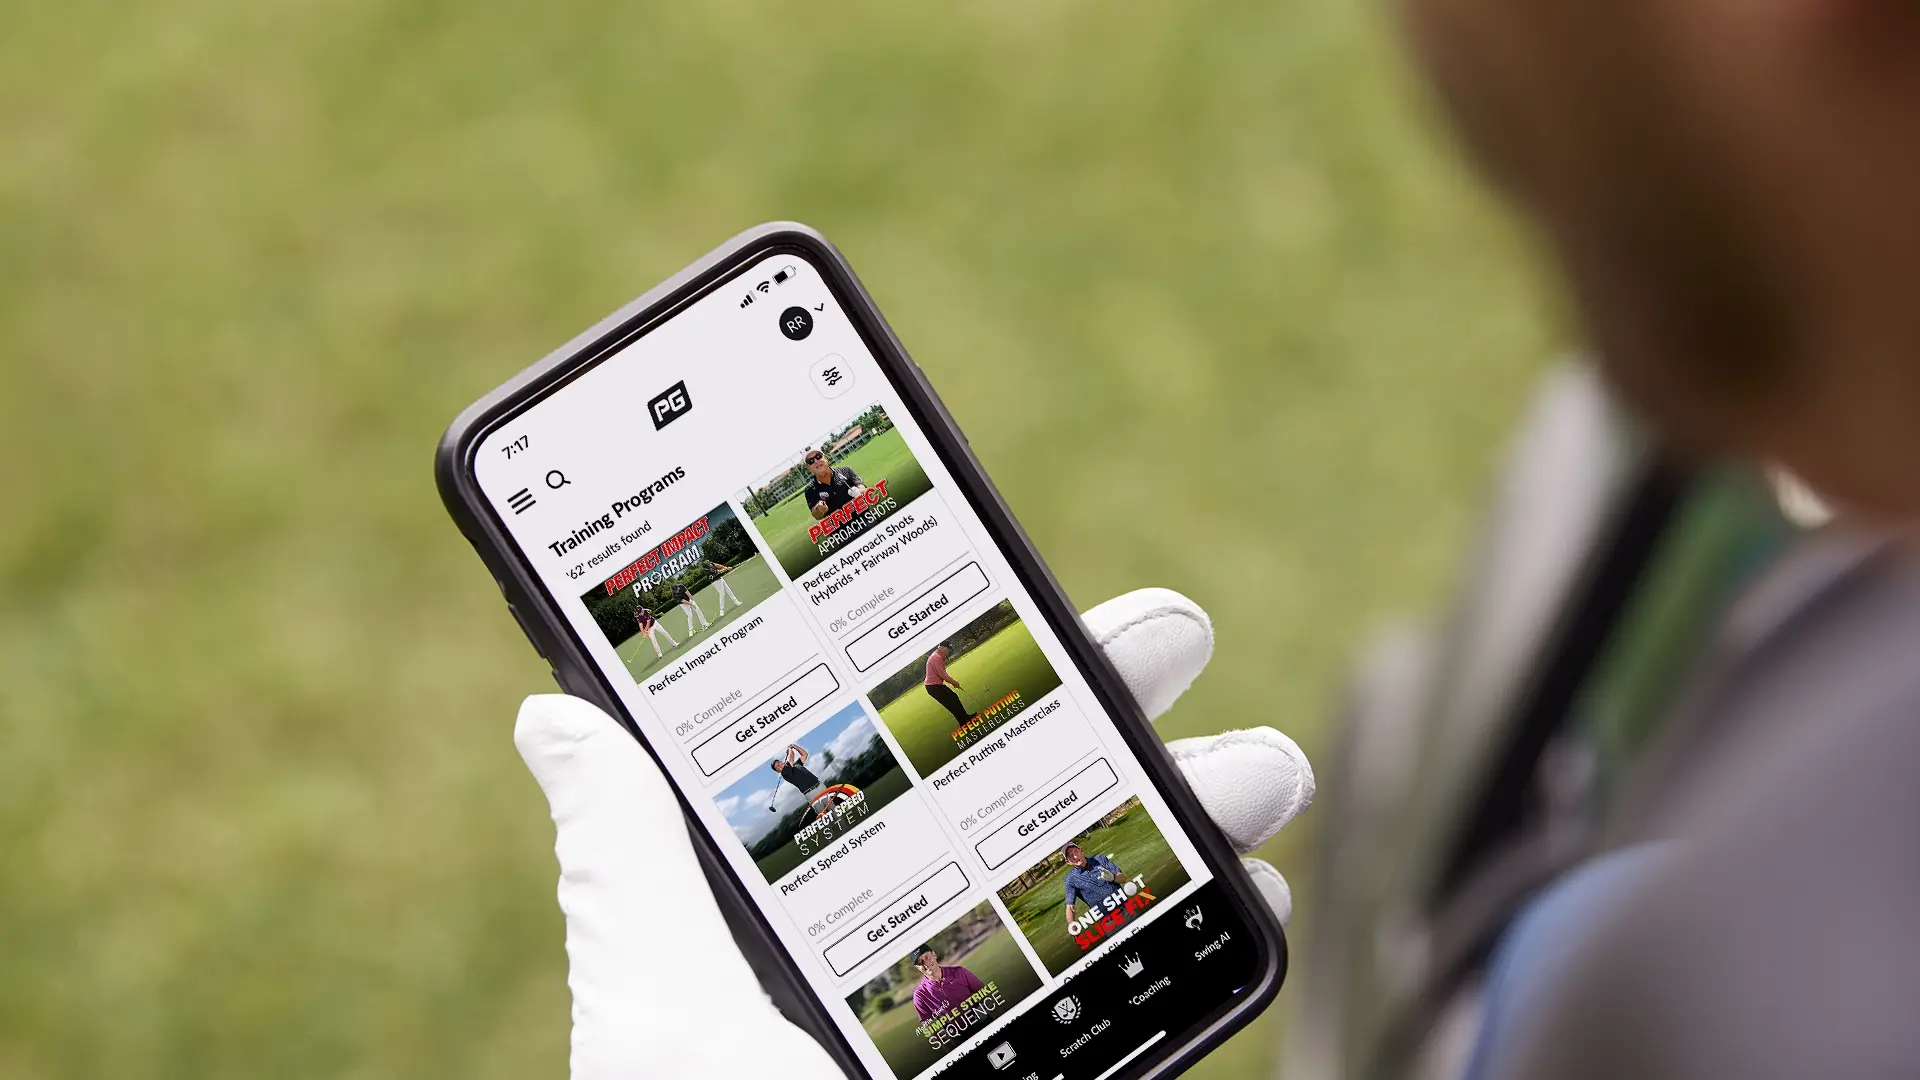 Mobile phone showing the performance golf app